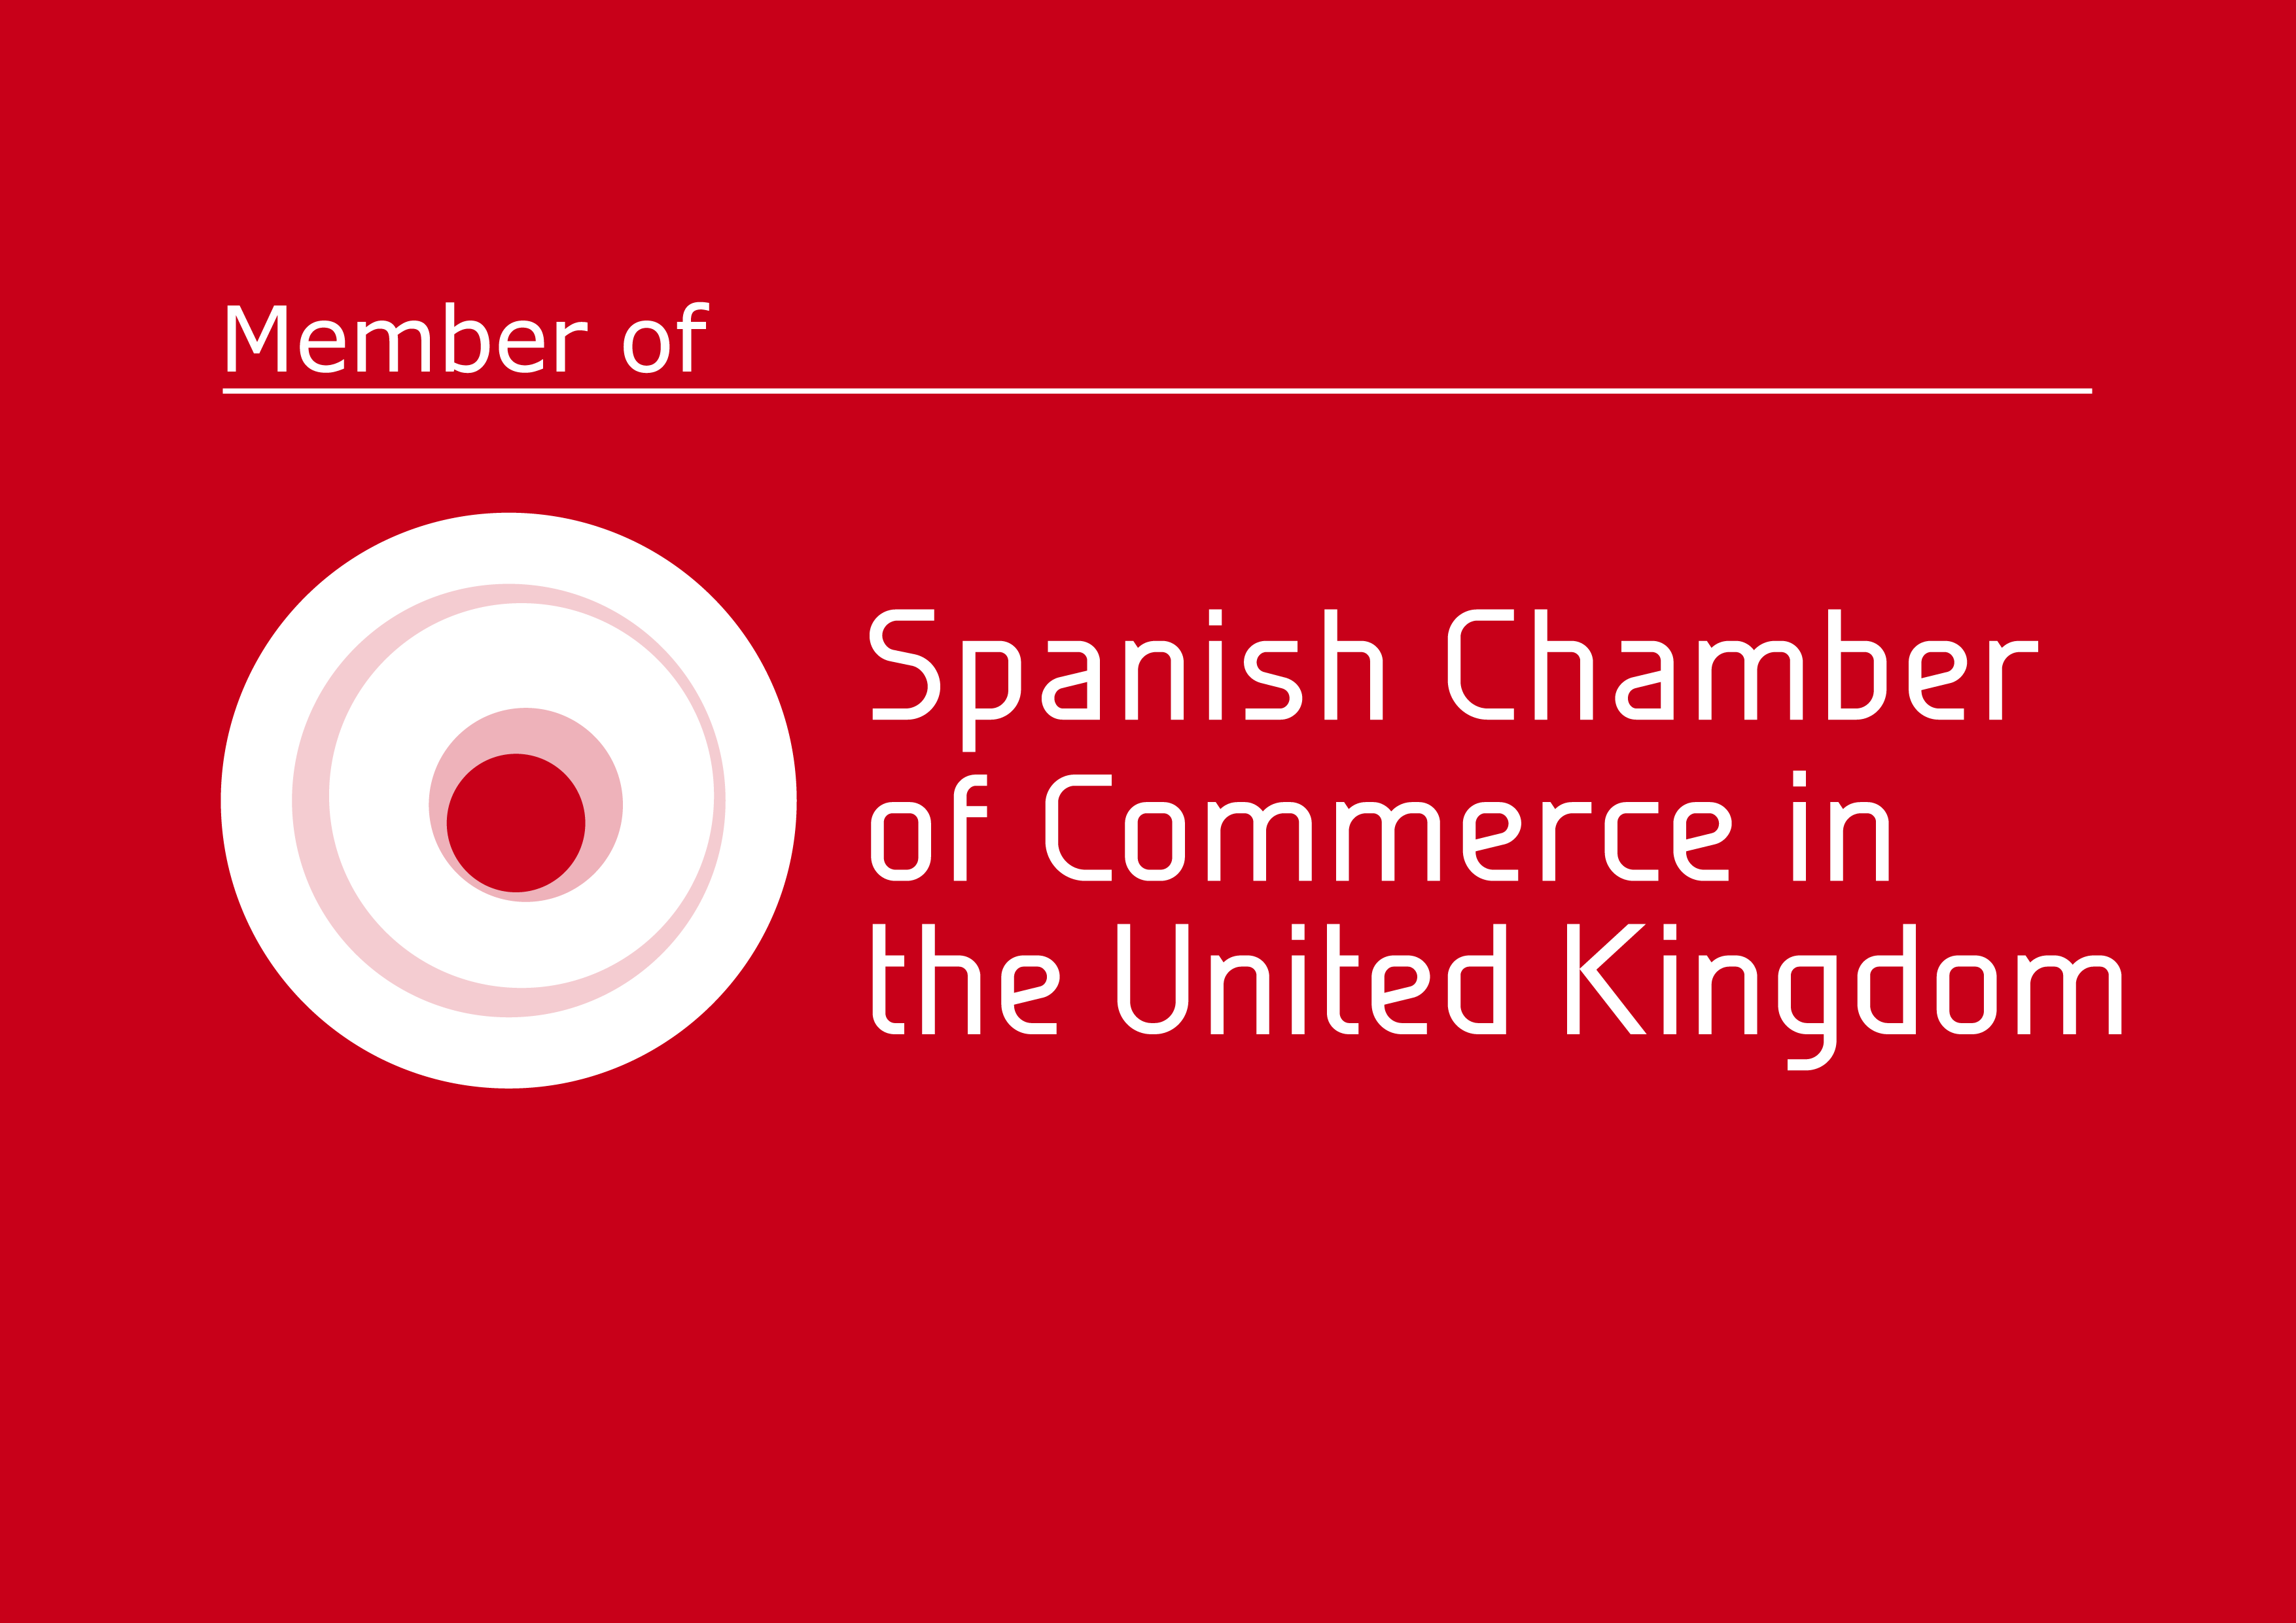 Web Red O Logo - Download our logo | Spanish Chamber of Commerce in Great Britain